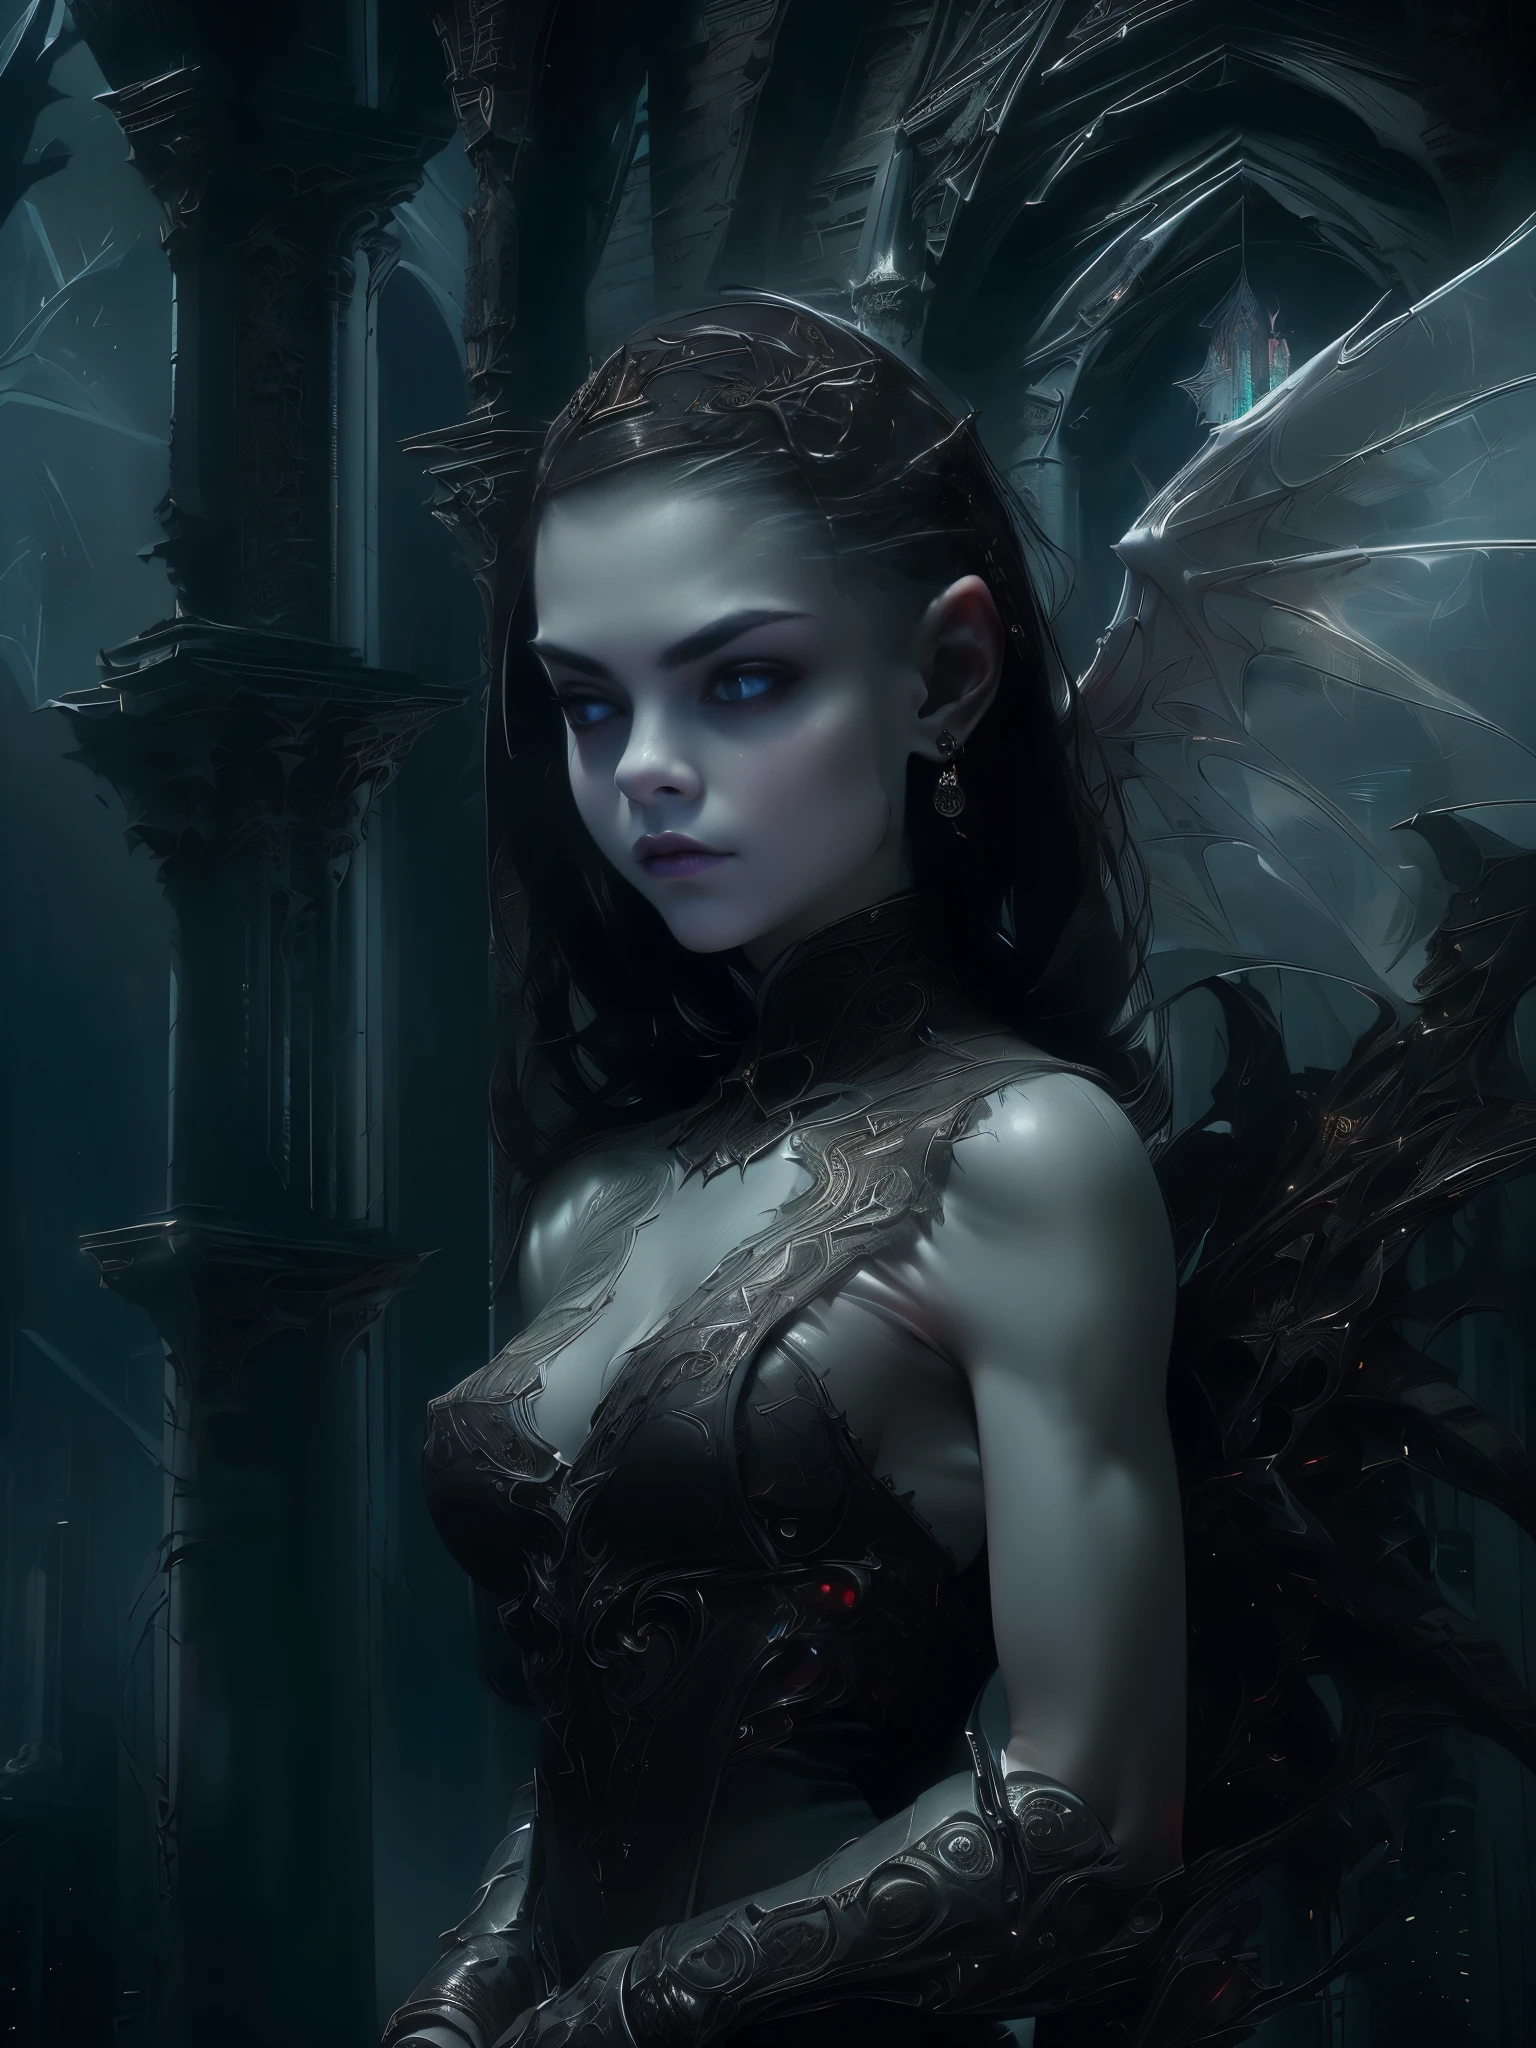 ((Space, Distant stars), (Fantastic image, 1 girl), (Other worlds, light of distant stars), (Dark cold colors mixed with warm shades). (Cara Delevingne: 1.25), (pure white skin: 1 ,25), (White skin girl, realistic detailed skin), (very beautiful vampire girl)).((gothic Face, gothic horror atmosphere, sinister gothic aesthetics), (gothic art style, creepy gothic portrait, dark fantasy, mixed with realism, gothic aesthetics)). ((She wears a sheer, translucent dress that accentuates her slender figure), (dressed in ornate medieval vampire armor), (dynamic pose), (perfect fingers: 1.24), (old: 1.5), (vampire body armor: 1.25), (graceful, strong, sophisticated figure: 1.5), (She is an angel descended into the underworld). and eyes, a real masterpiece, with an atmosphere of horror, gothic, blood, haunted cathedrals). (Dim lighting, dark surroundings - the creepy cinematic setting is great)). ((clear focus, volumetric fog near the floor, 8K, UHD, DSLR, high quality, grainy. photorealism, lomography, fantastic dark art, utopian reality)).